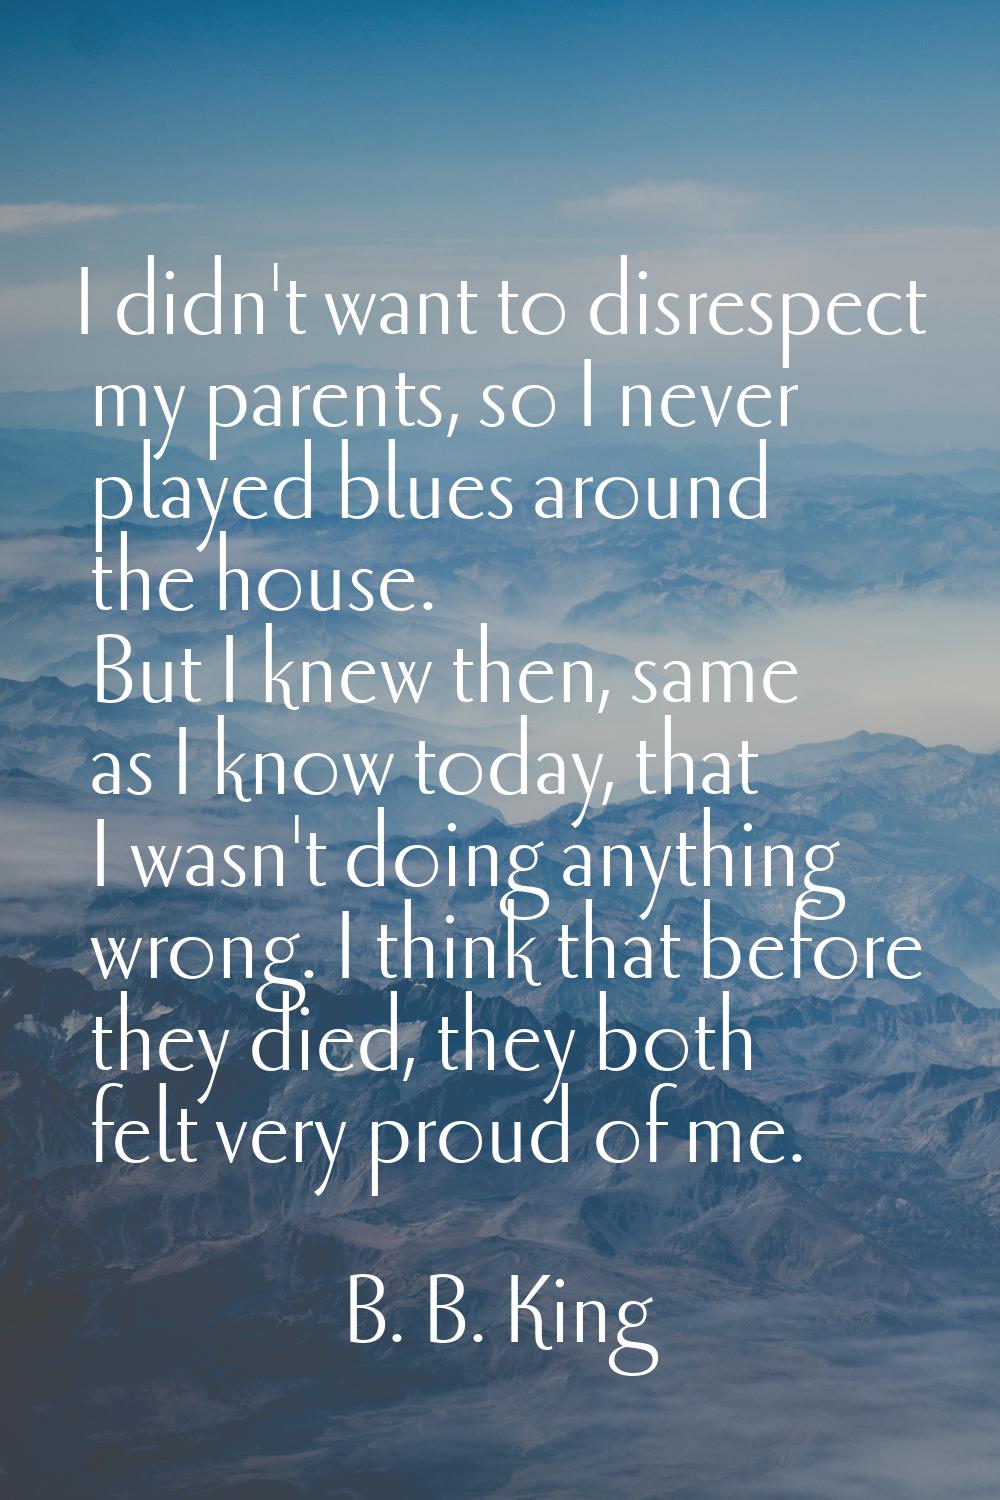 I didn't want to disrespect my parents, so I never played blues around the house. But I knew then, 